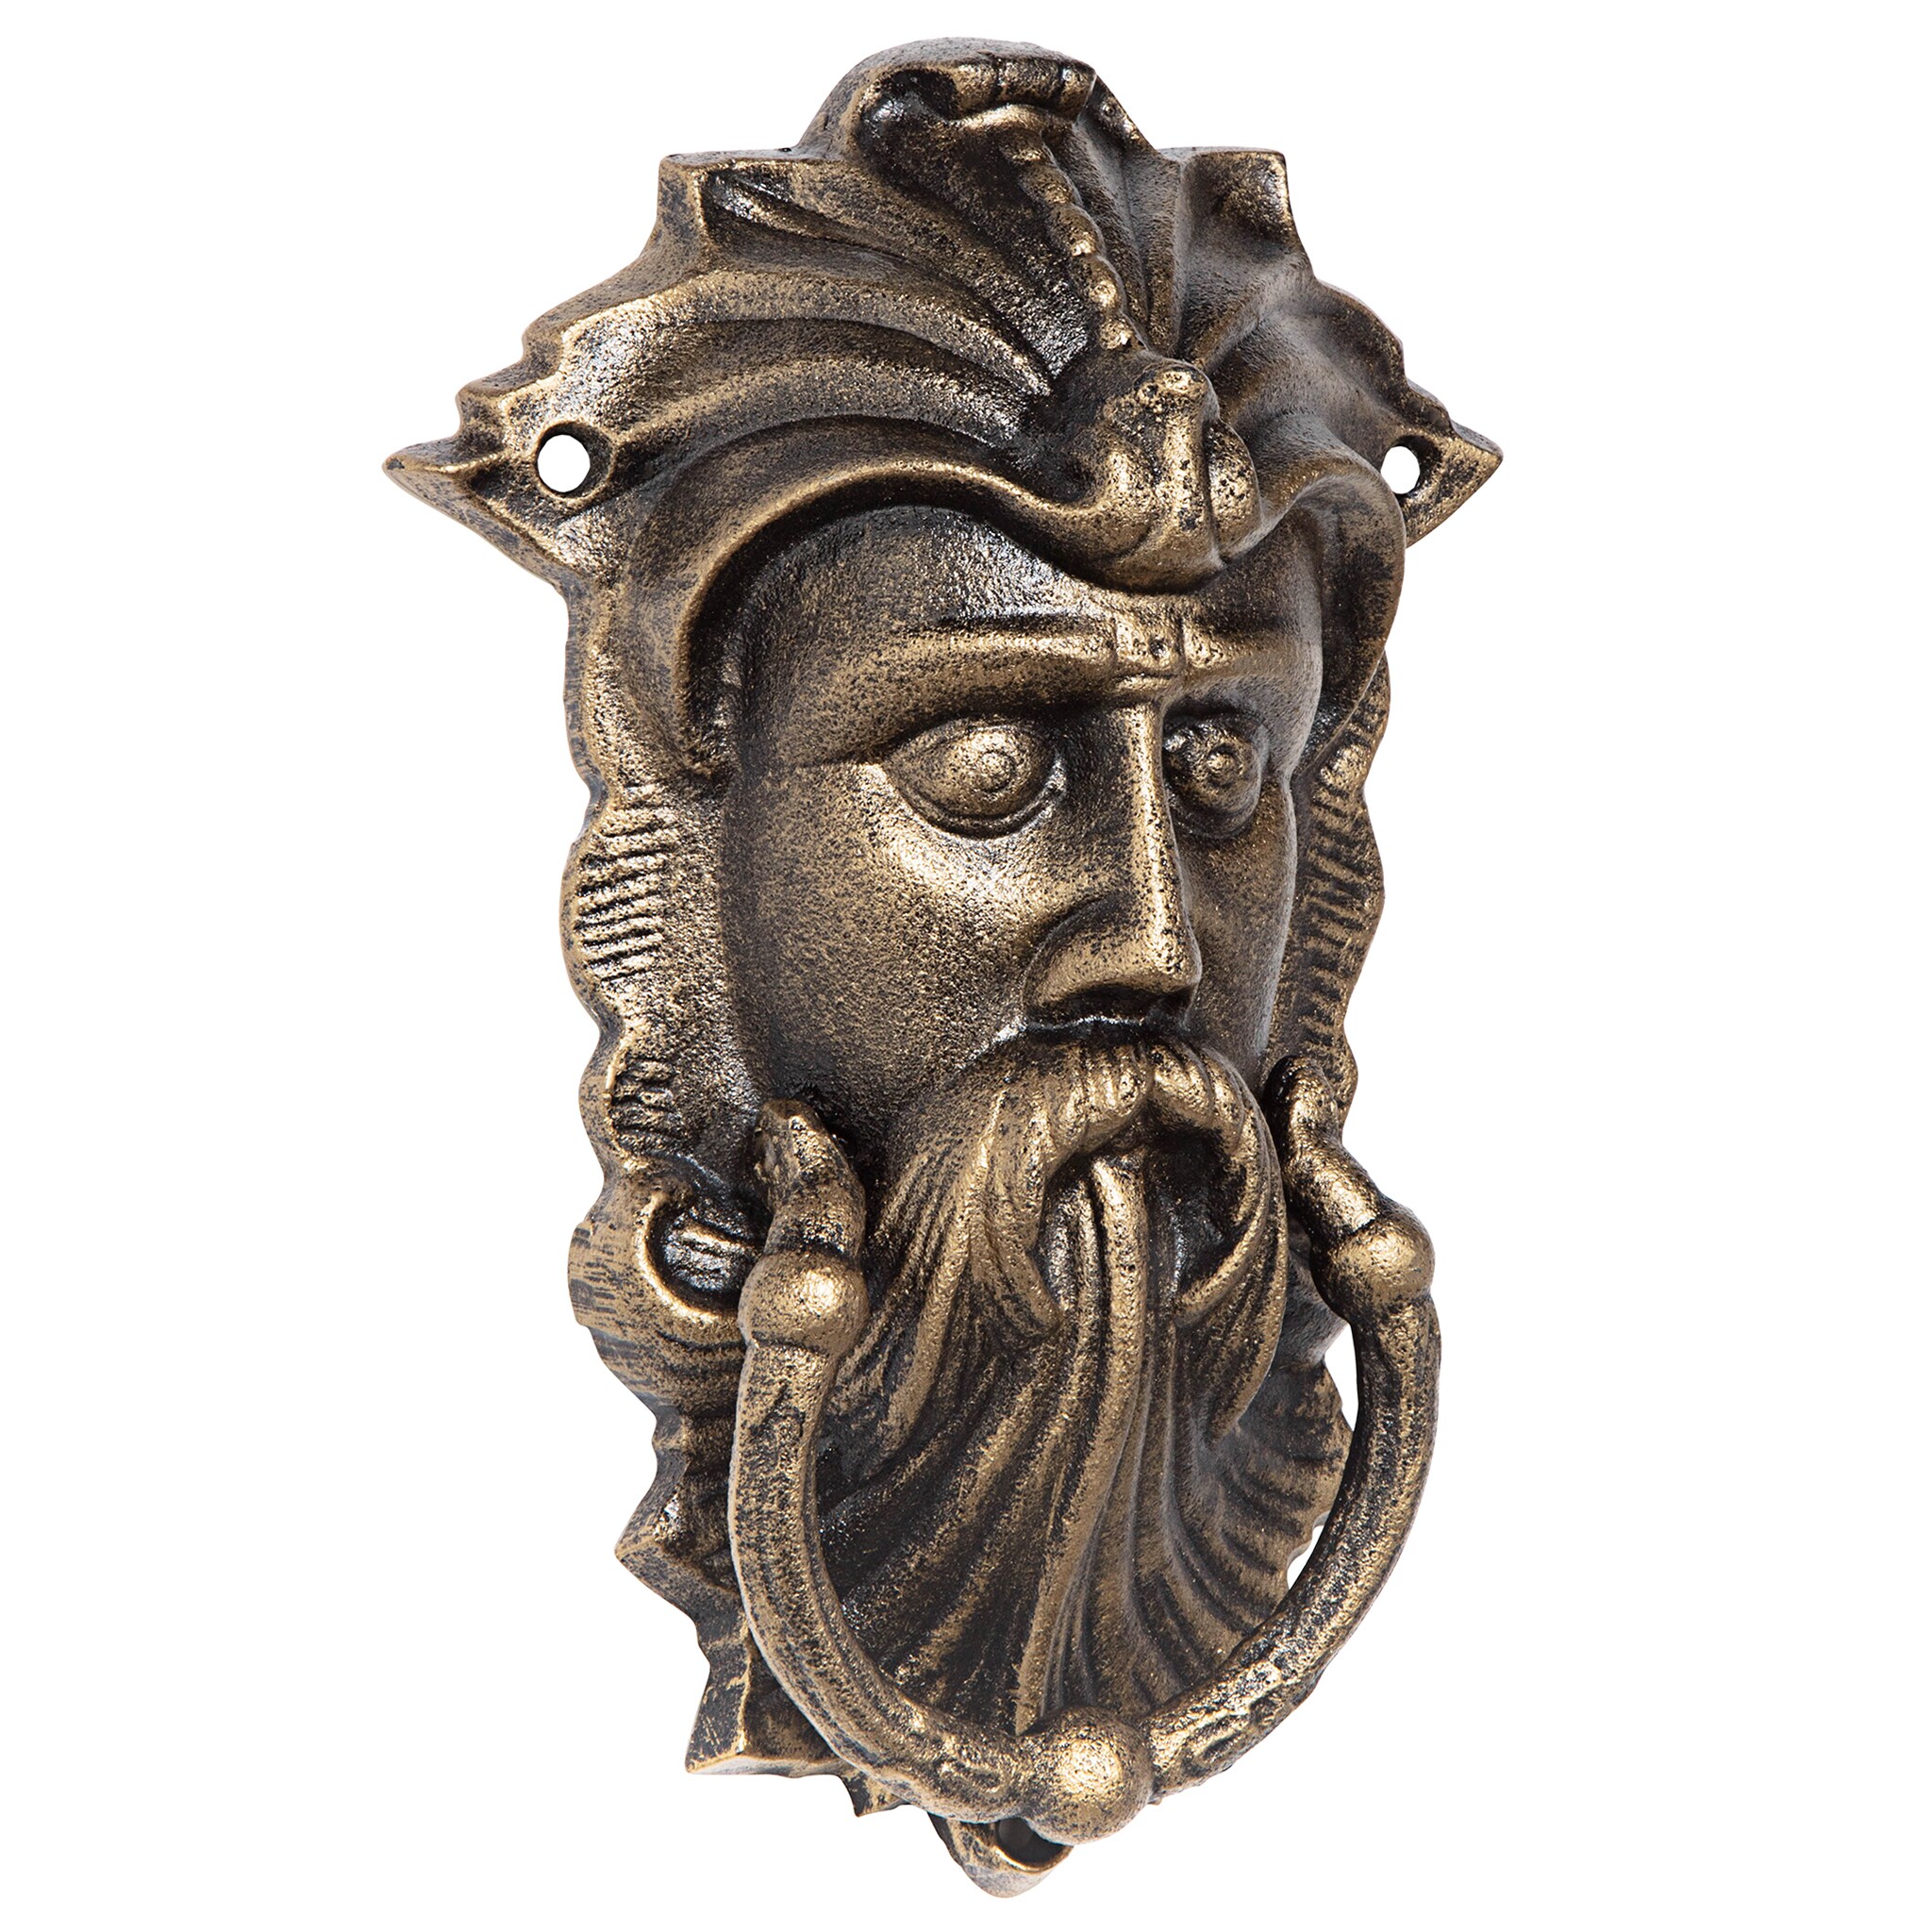 Design Toscano 5.5-in Entry Door Knocker, Bronze Finish, Iron Material,  Oil-rubbed Hardware